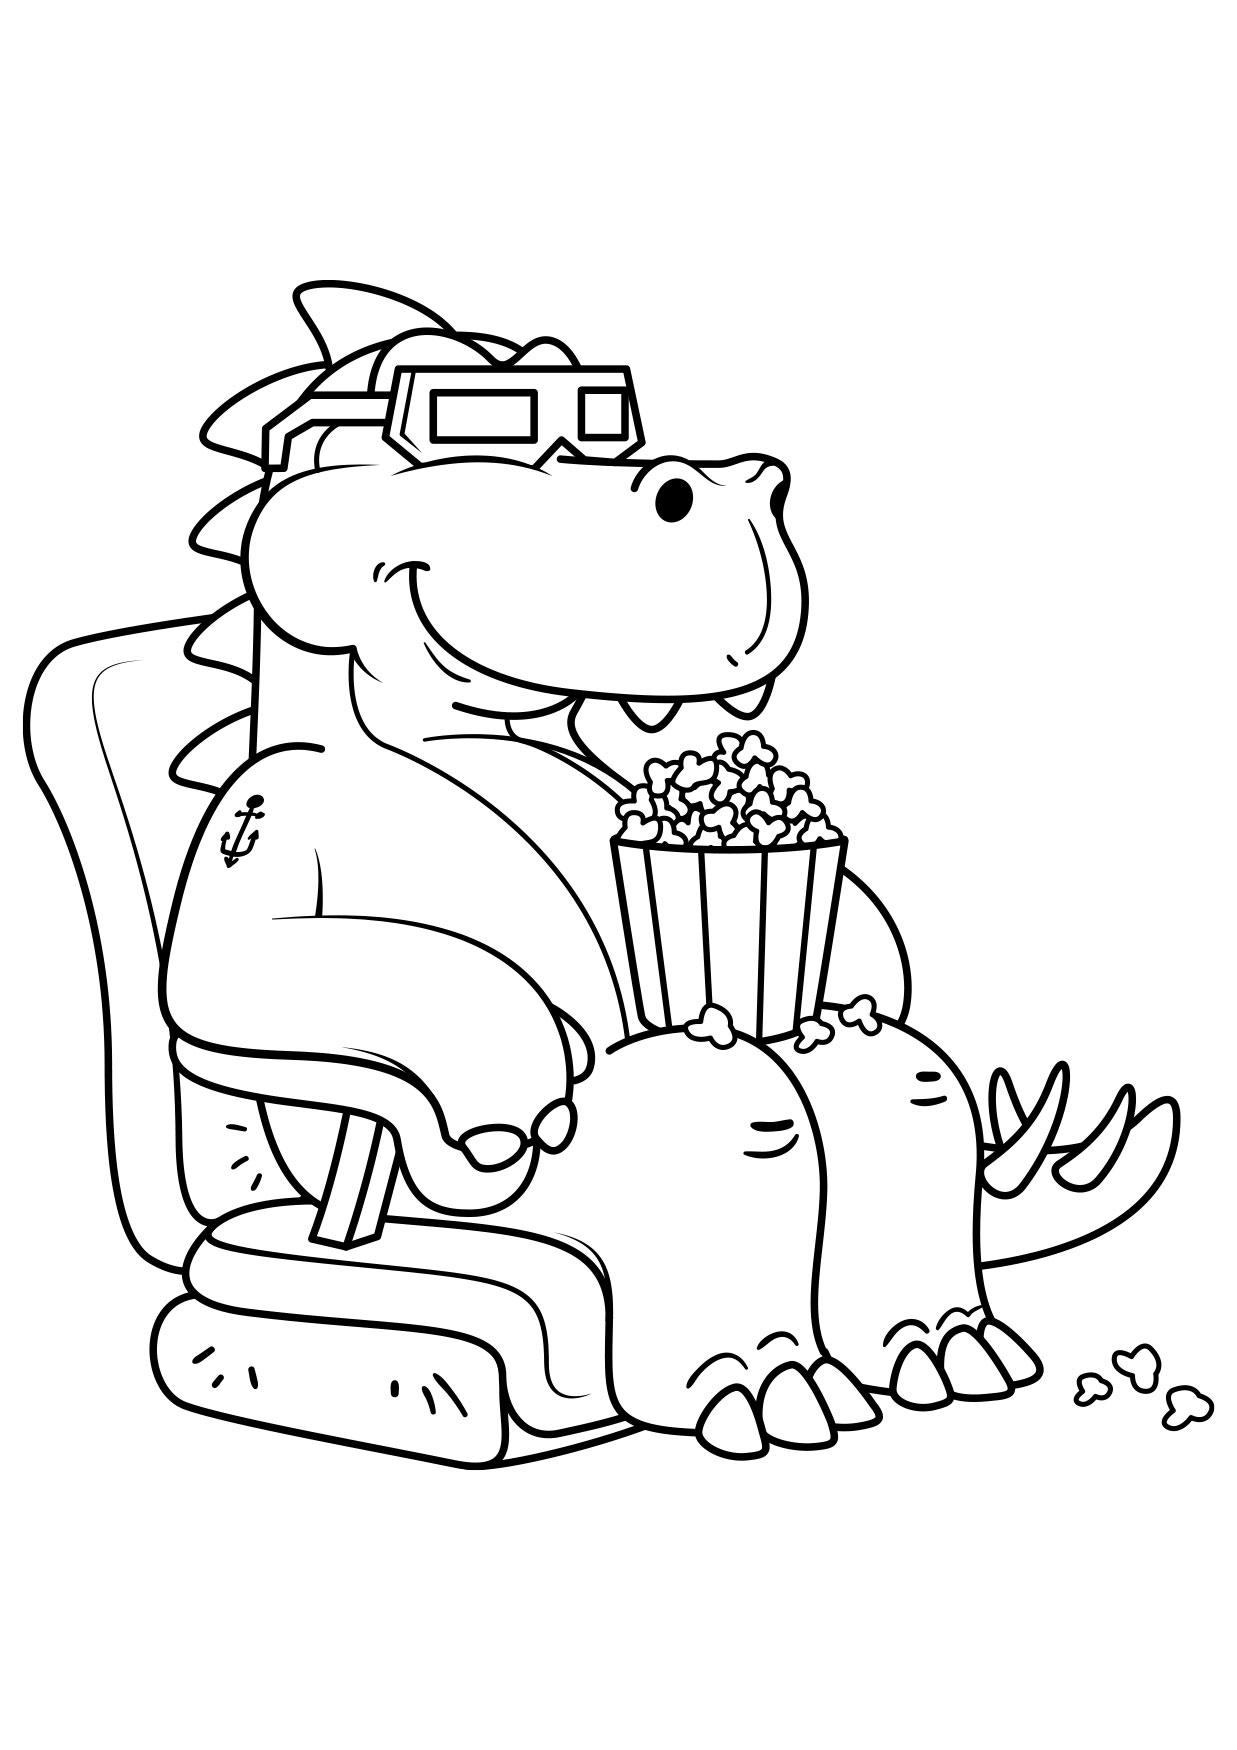 Coloring page dinosaur to the movies